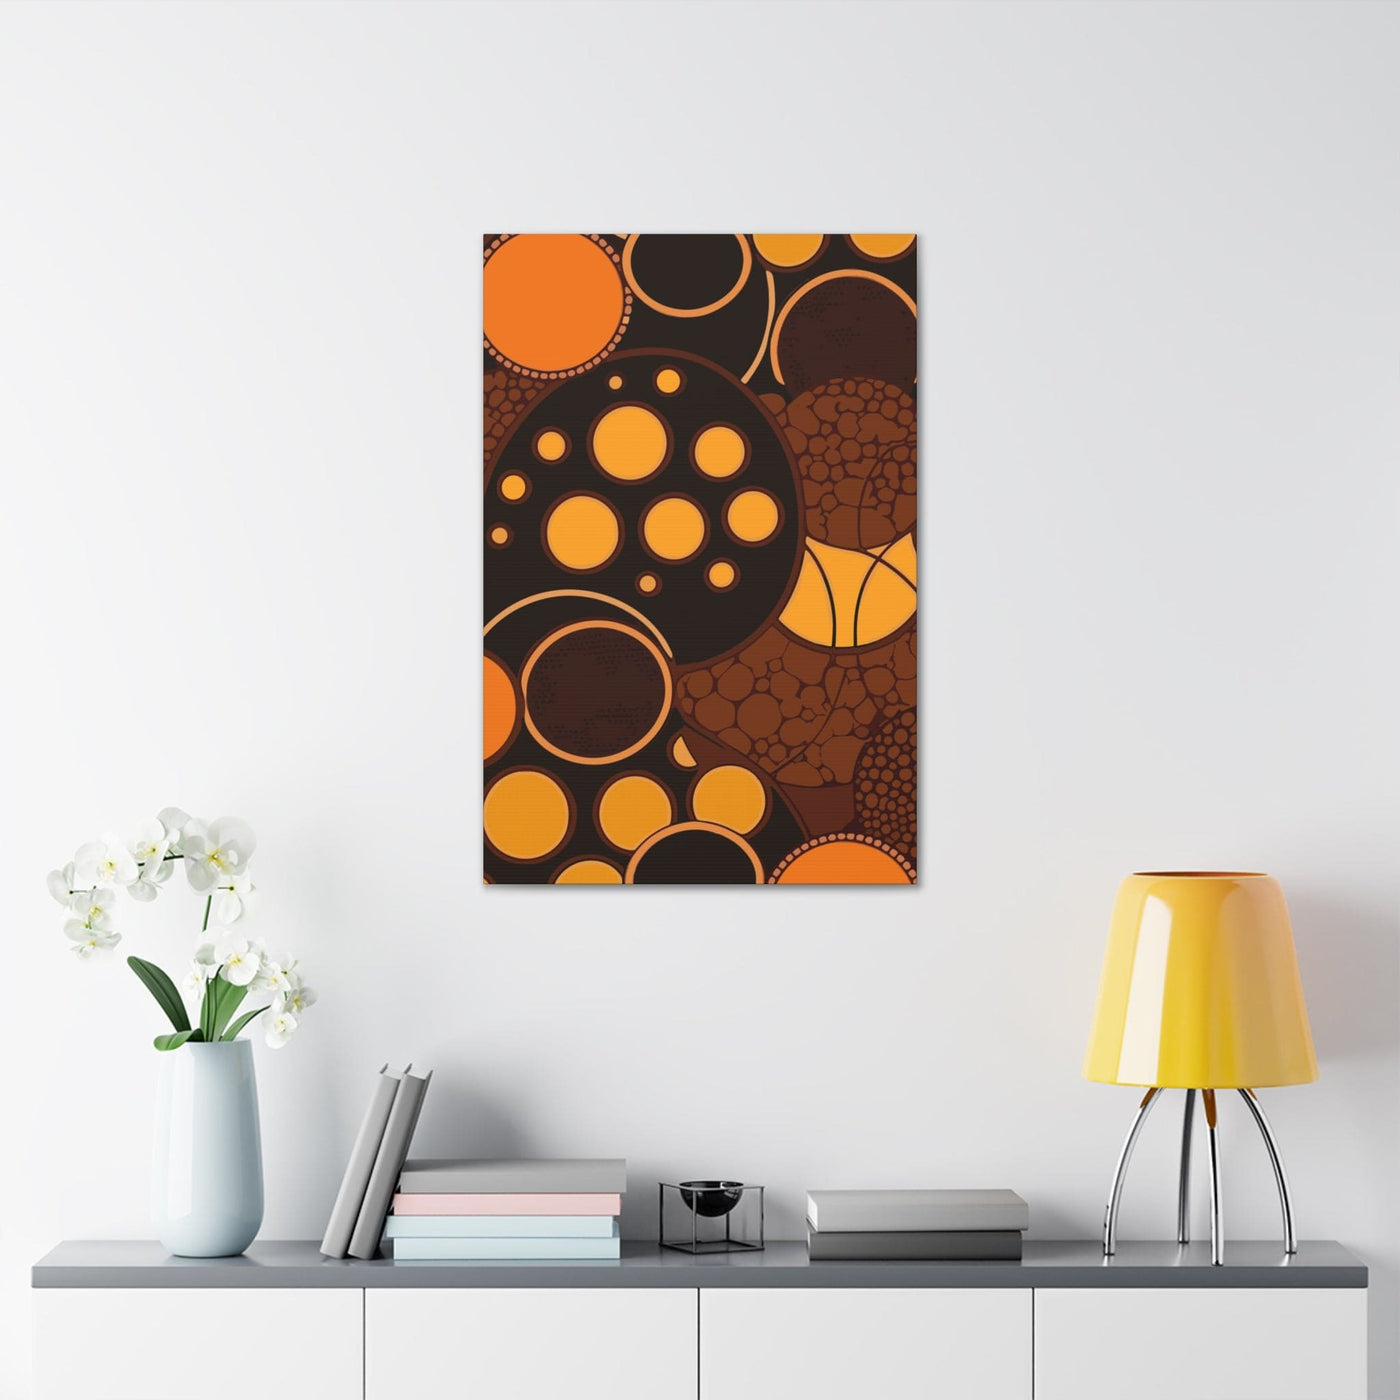 Wall Art Decor Canvas Print Artwork Orange And Brown Spotted Illustration